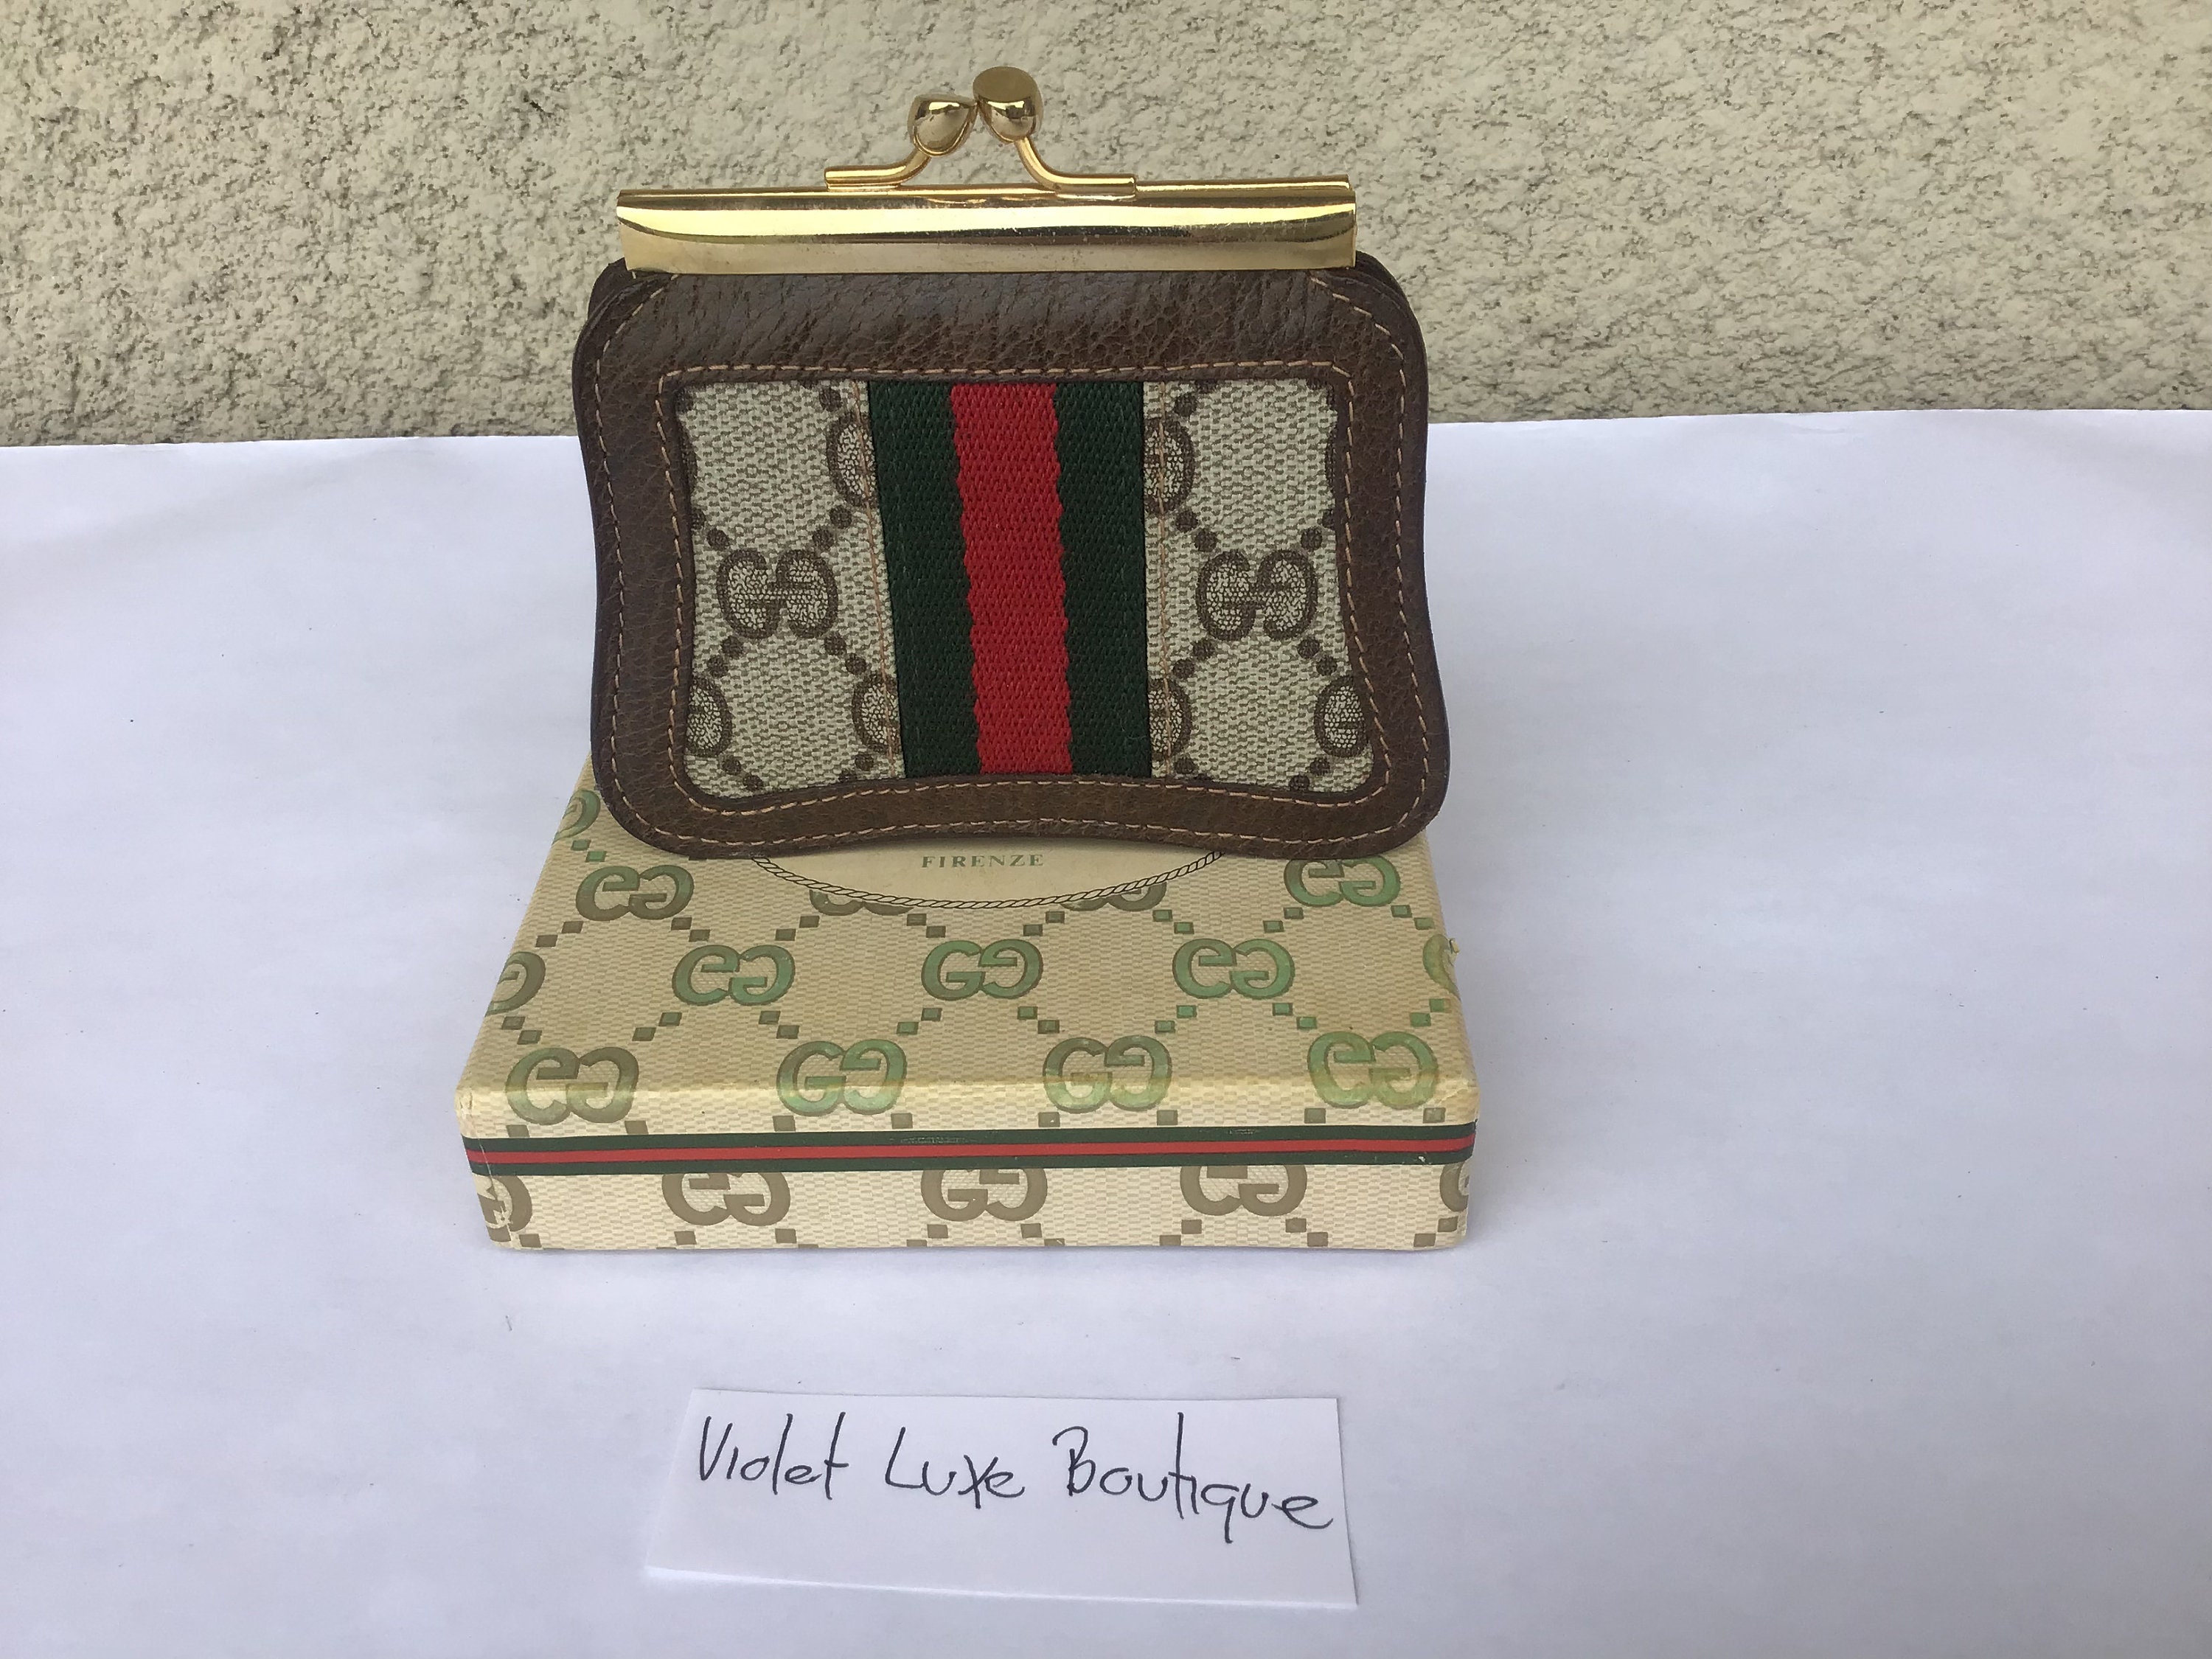 Vintage Gucci Kisslock Coins Purse from 1989 with Original Box and